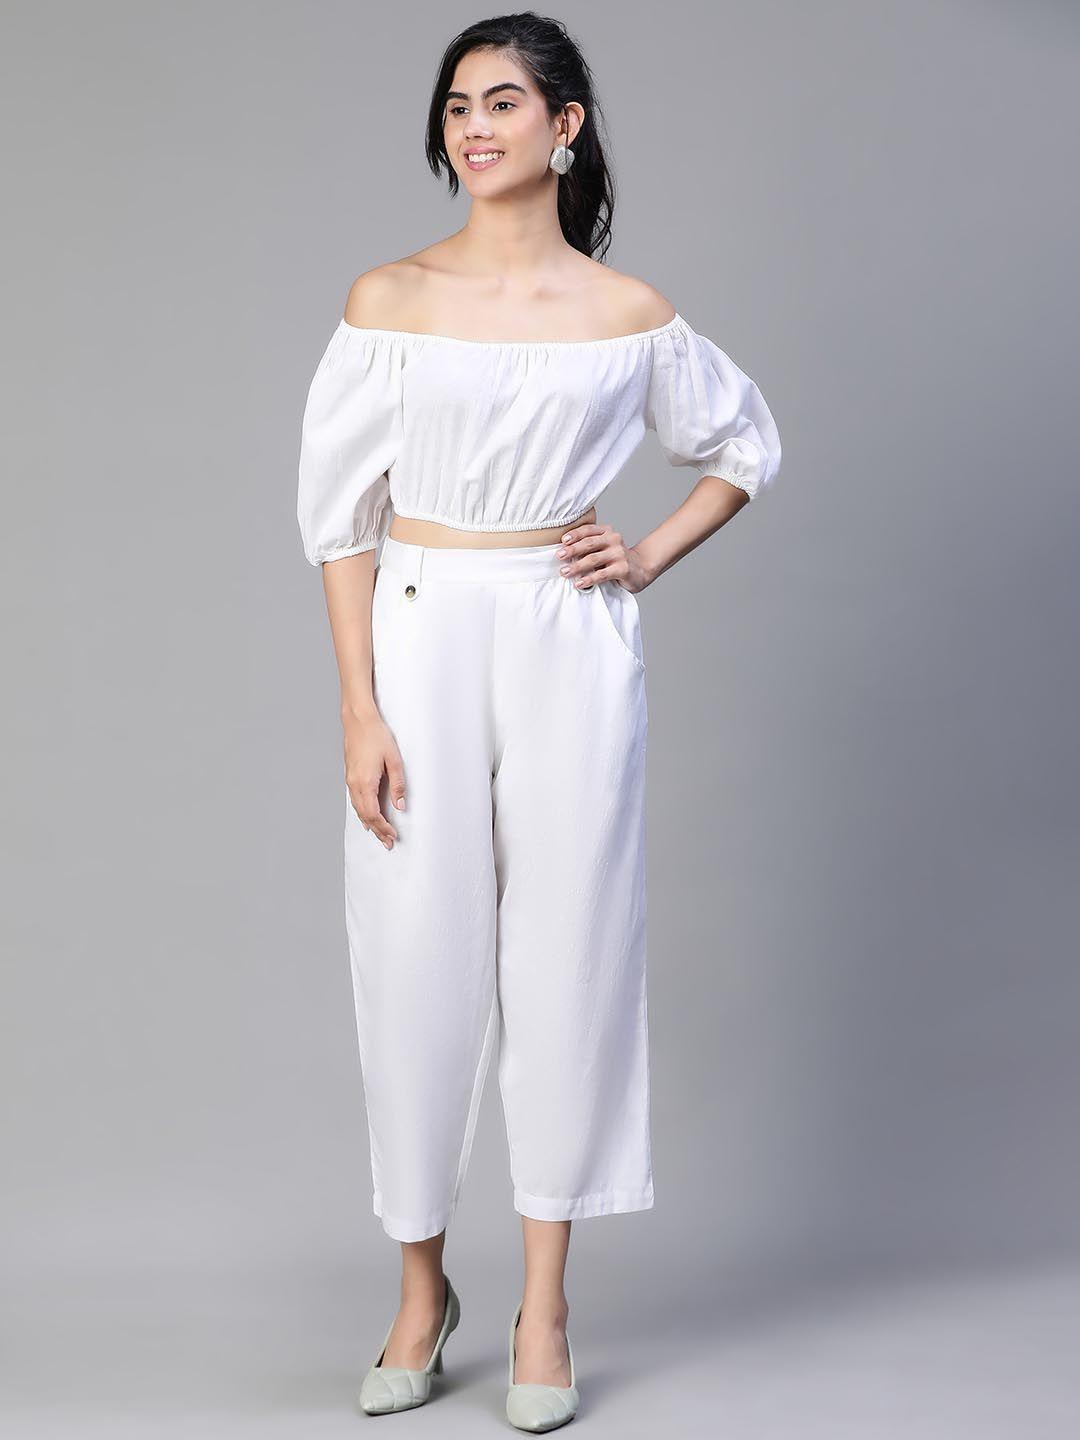 oxolloxo striped off-shoulder cotton crop top & trouser co-ord set